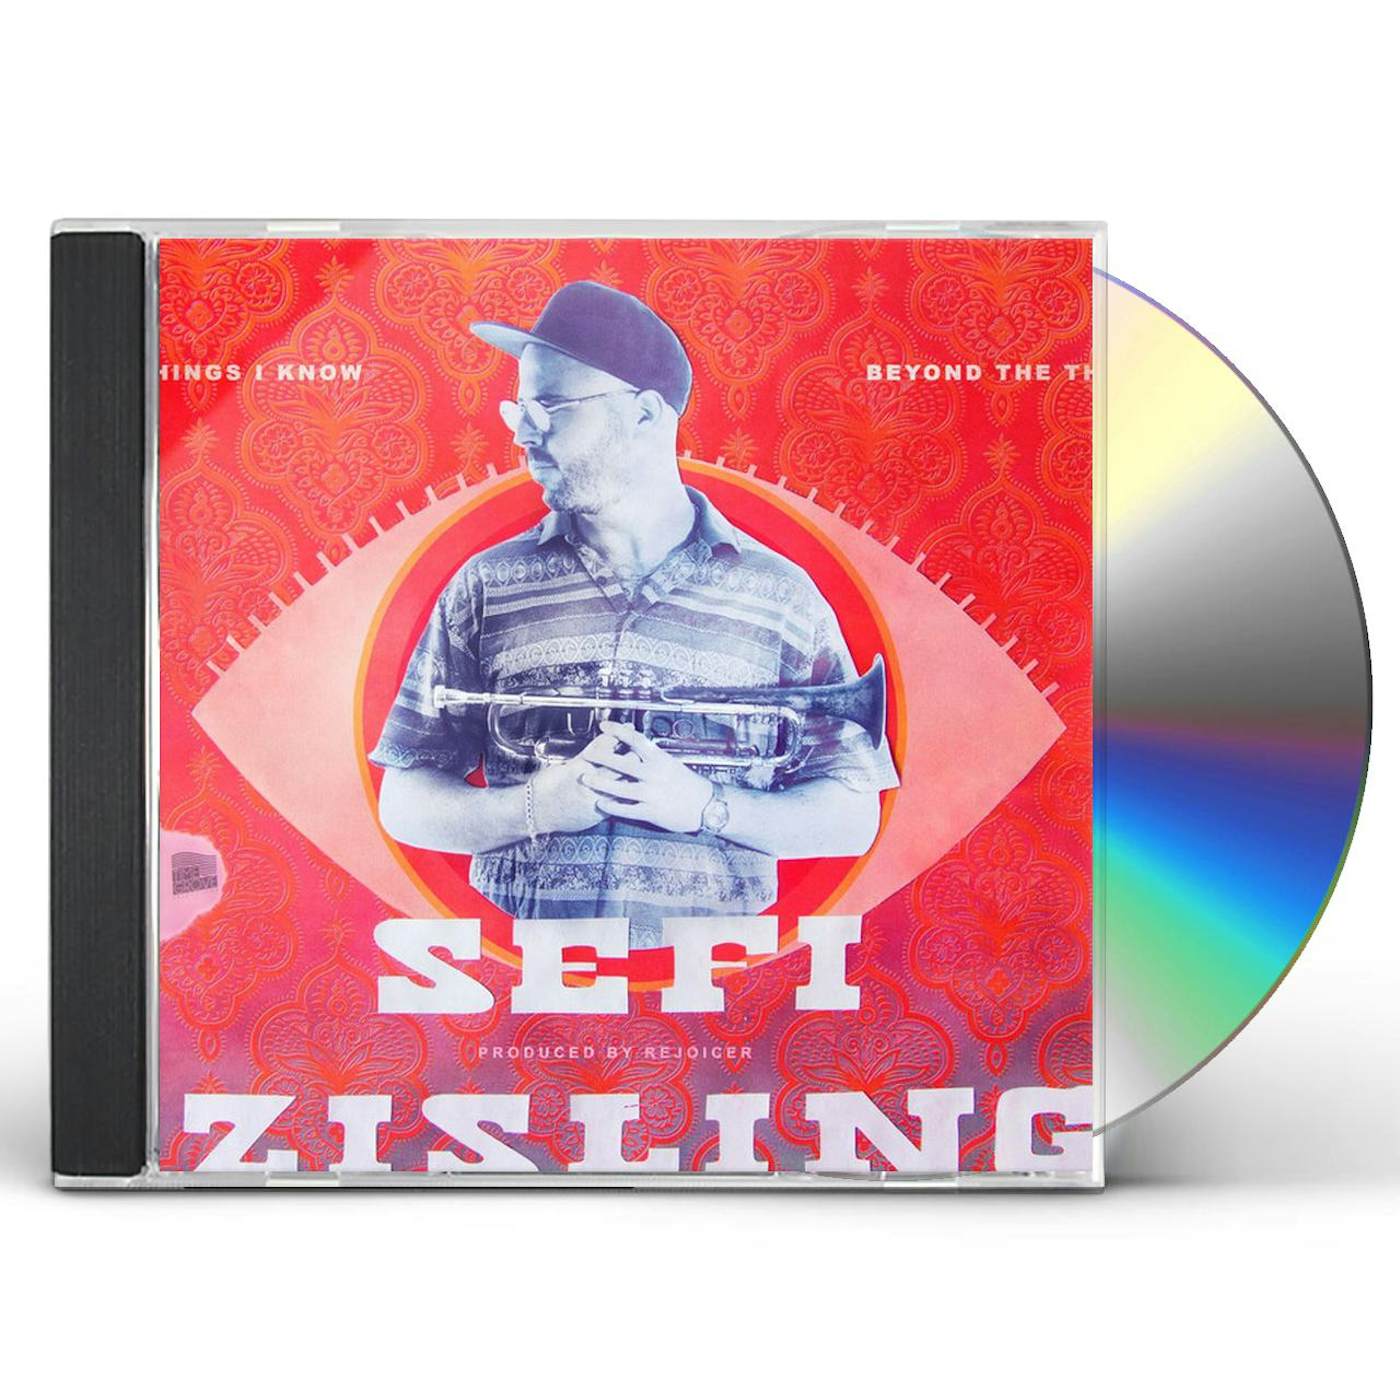 Sefi Zisling BEYOND THE THINGS I KNOW CD